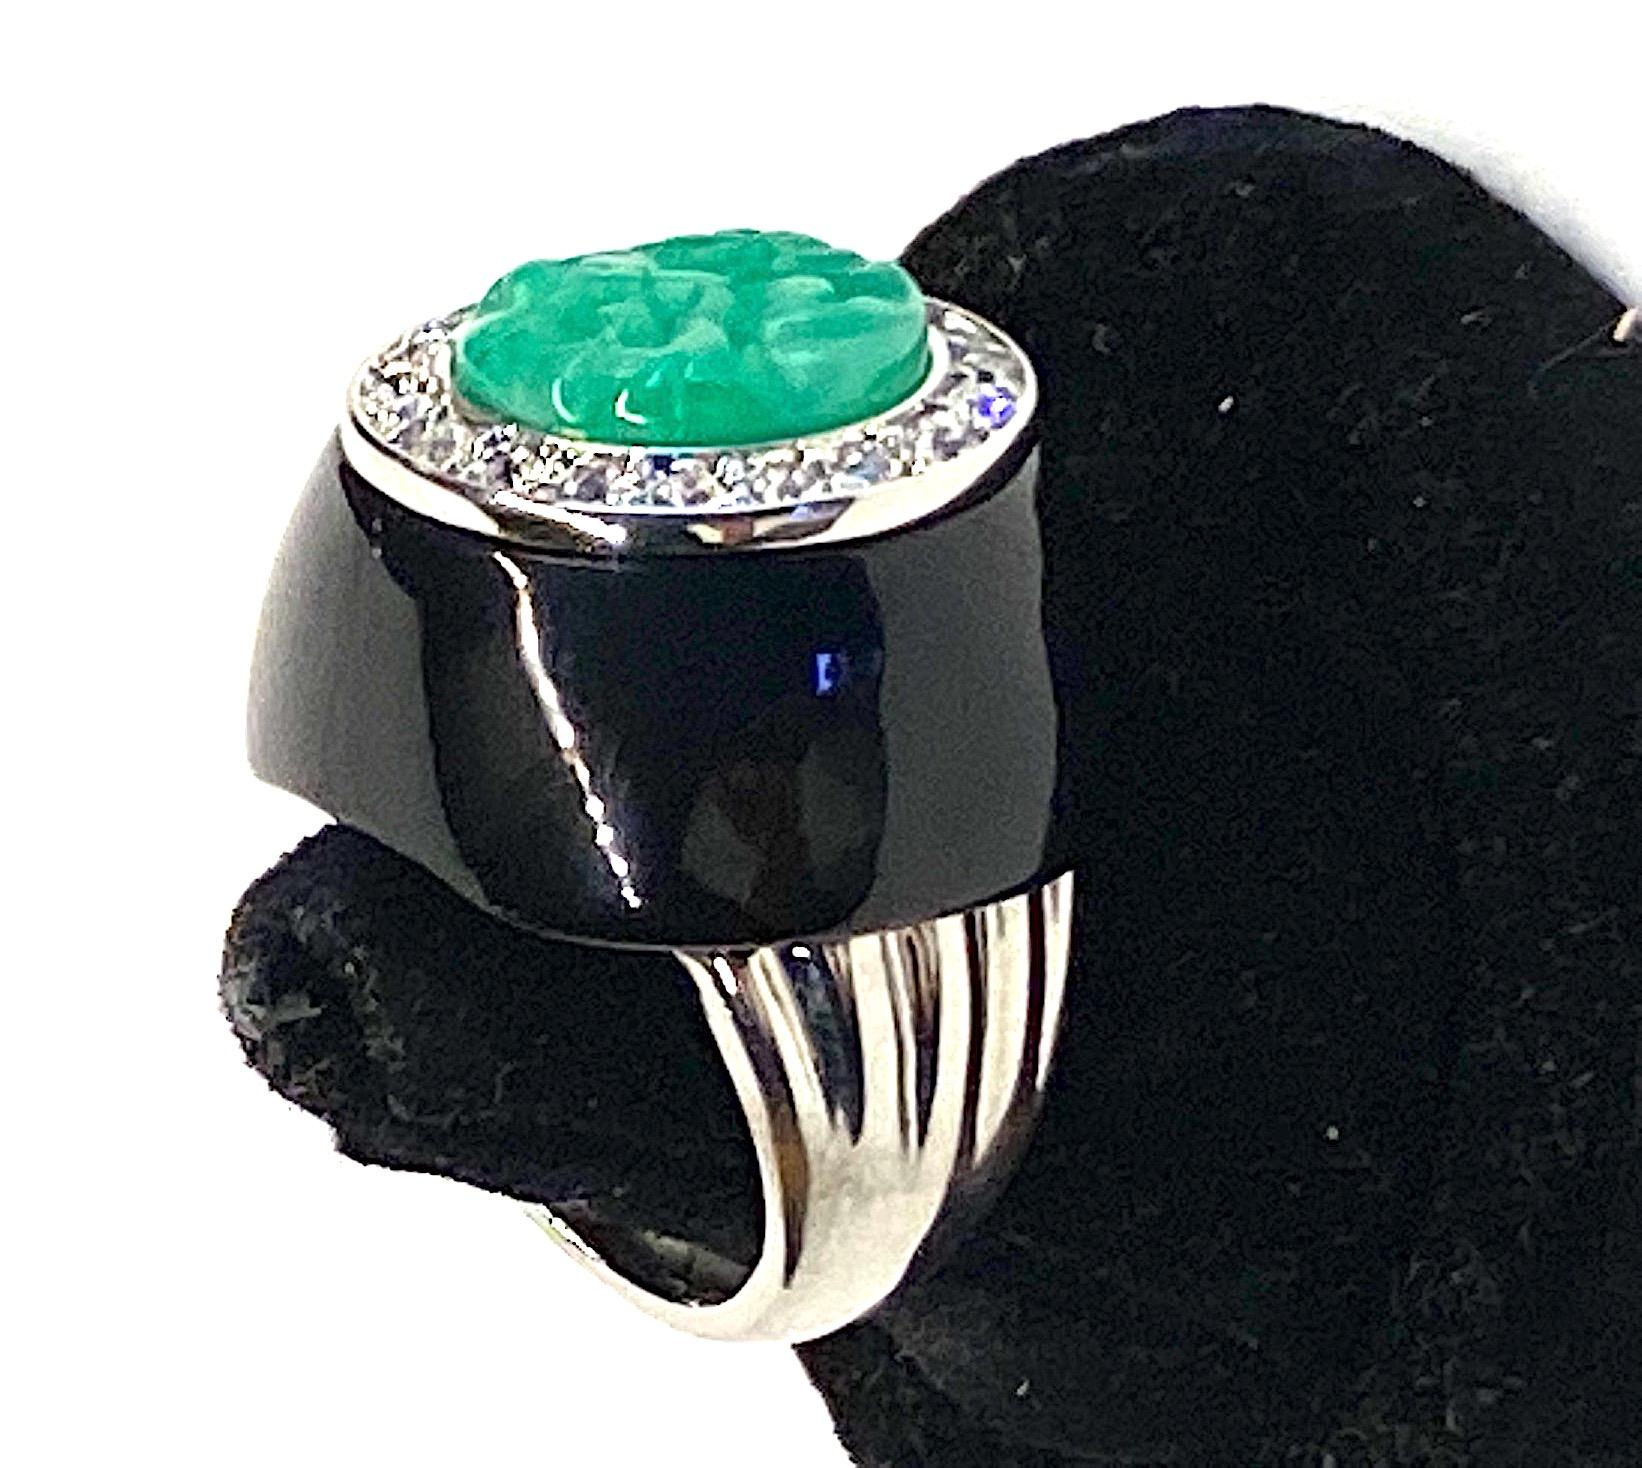 Kenneth Jay Lane 1980s Art Deco Black & Green Dome Ring 2